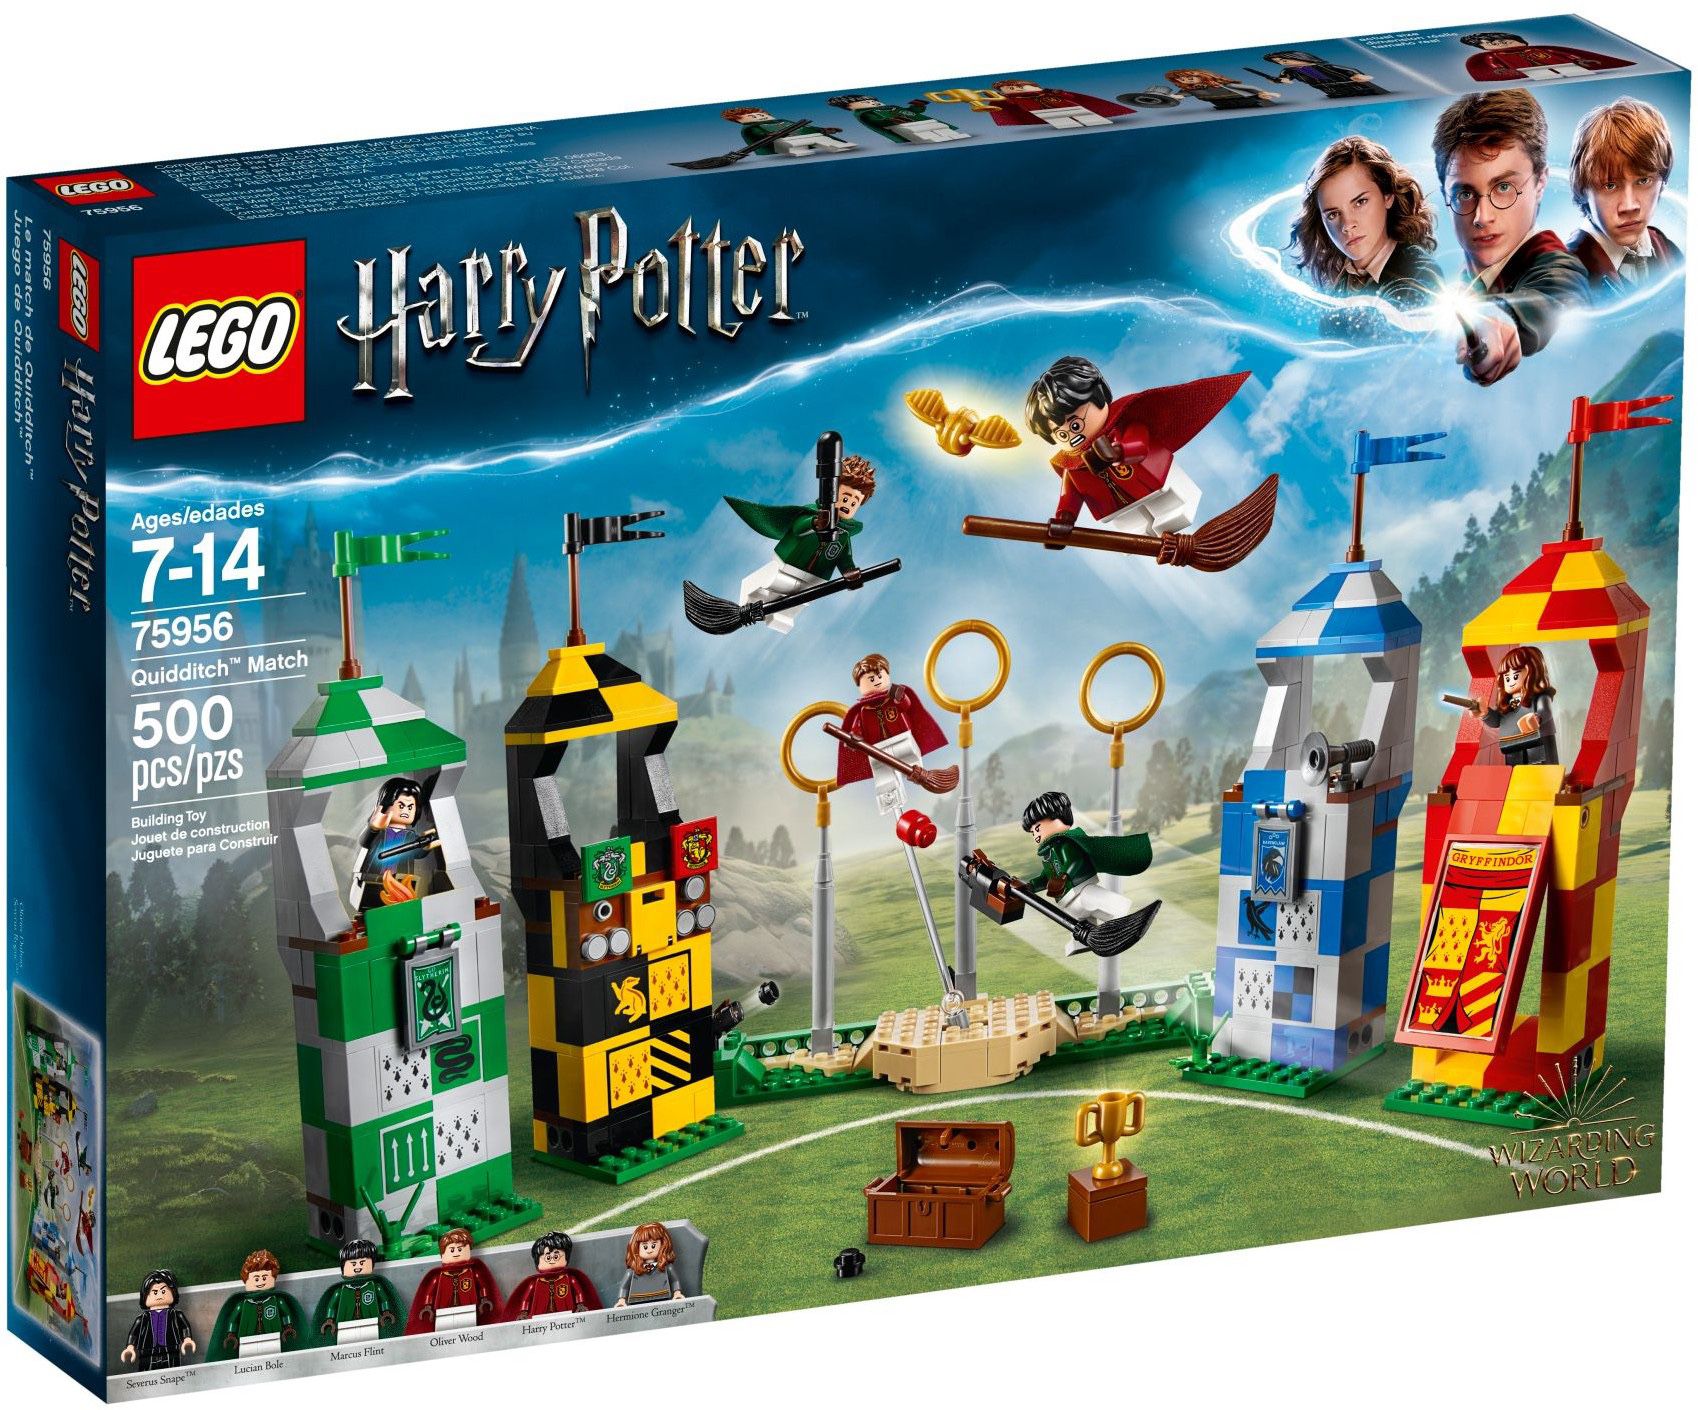 LEGO 75956 Harry Potter Quidditch Match New and Sealed